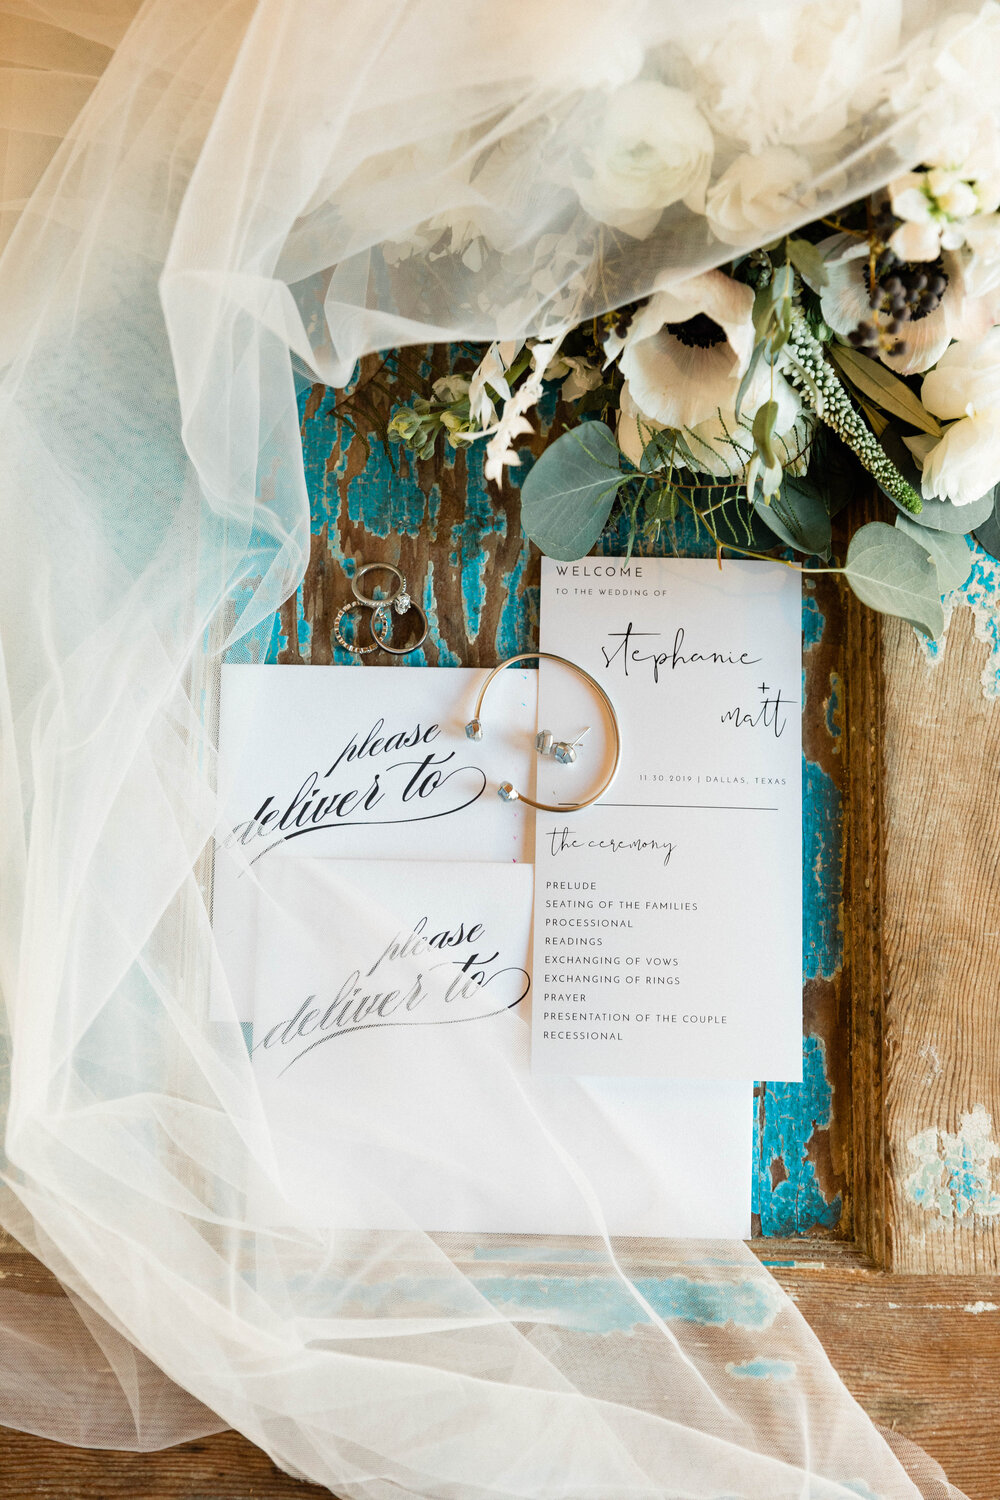 Invitations for a Hickory Street Annex wedding